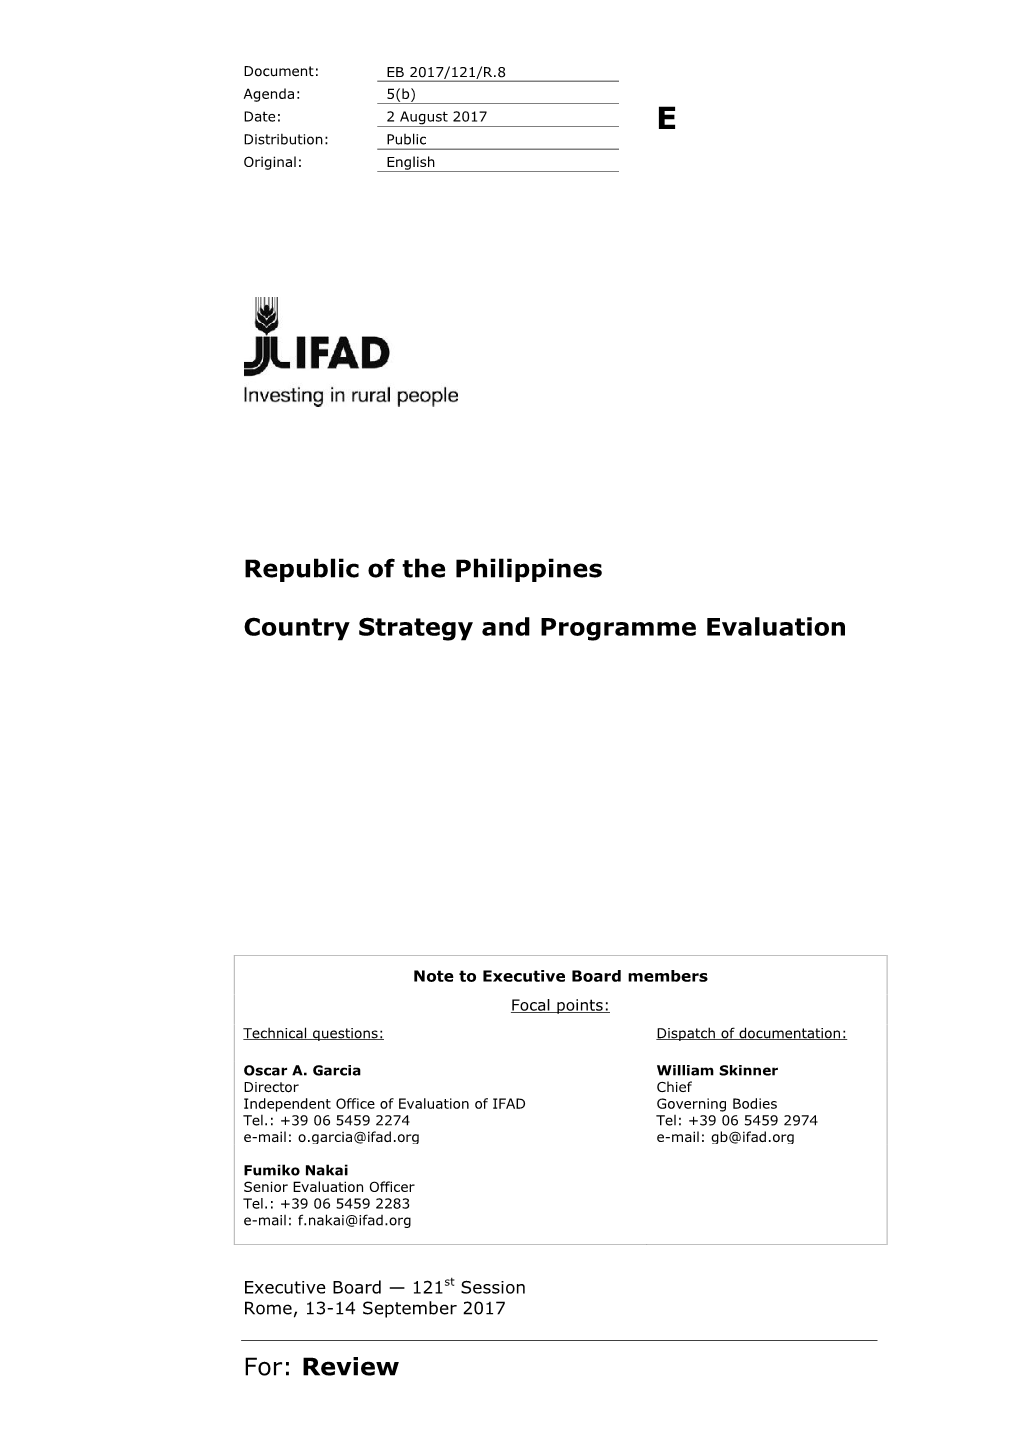 Republic of the Philippines Country Strategy and Programme Evaluation 5